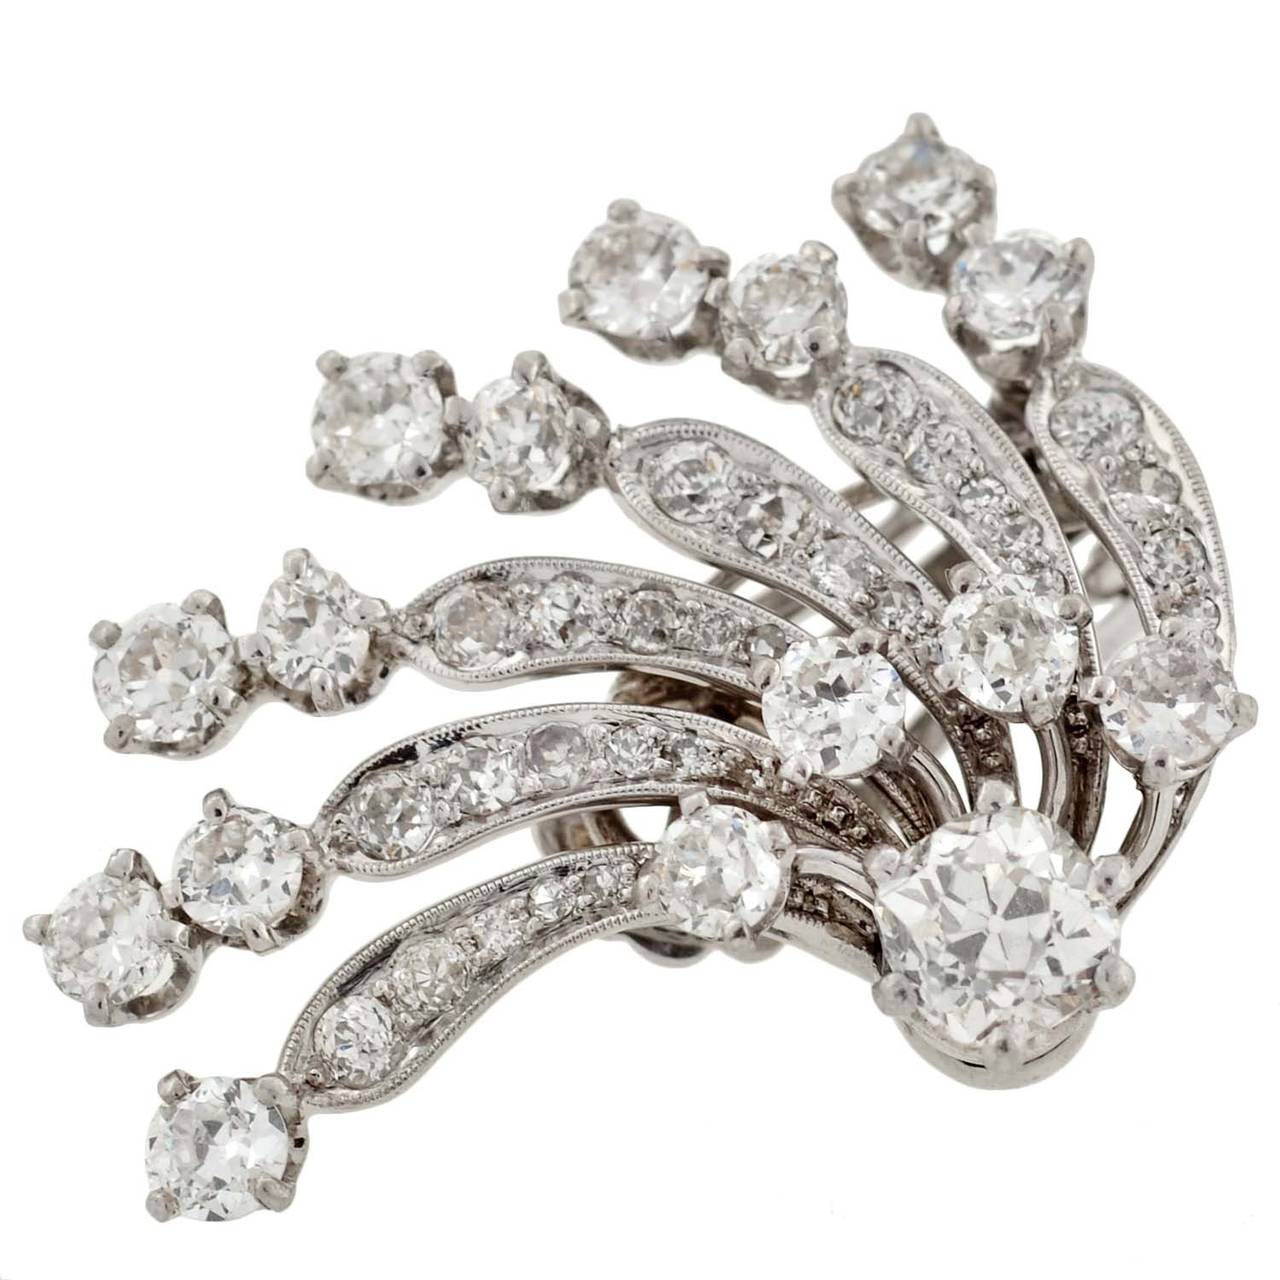 A dramatic pair of diamond earrings from the Early Retro (ca1935) era! These dazzling earrings are made of 14kt white gold and have a very eye-catching Retro look. Each earring features 6 curved 